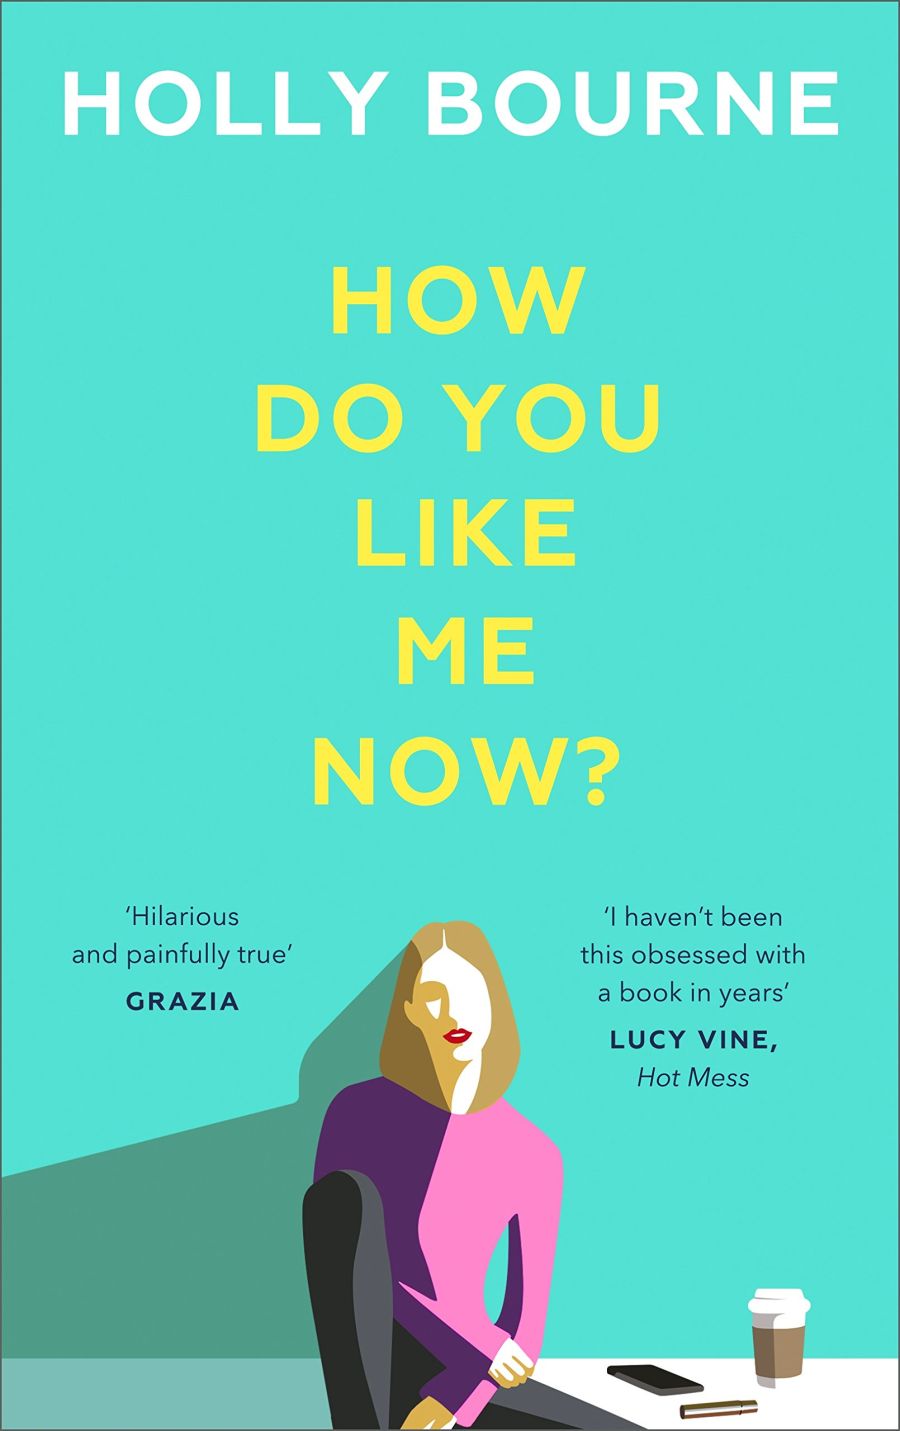 Book cover: How do you like me now?, by Holly Bourne.